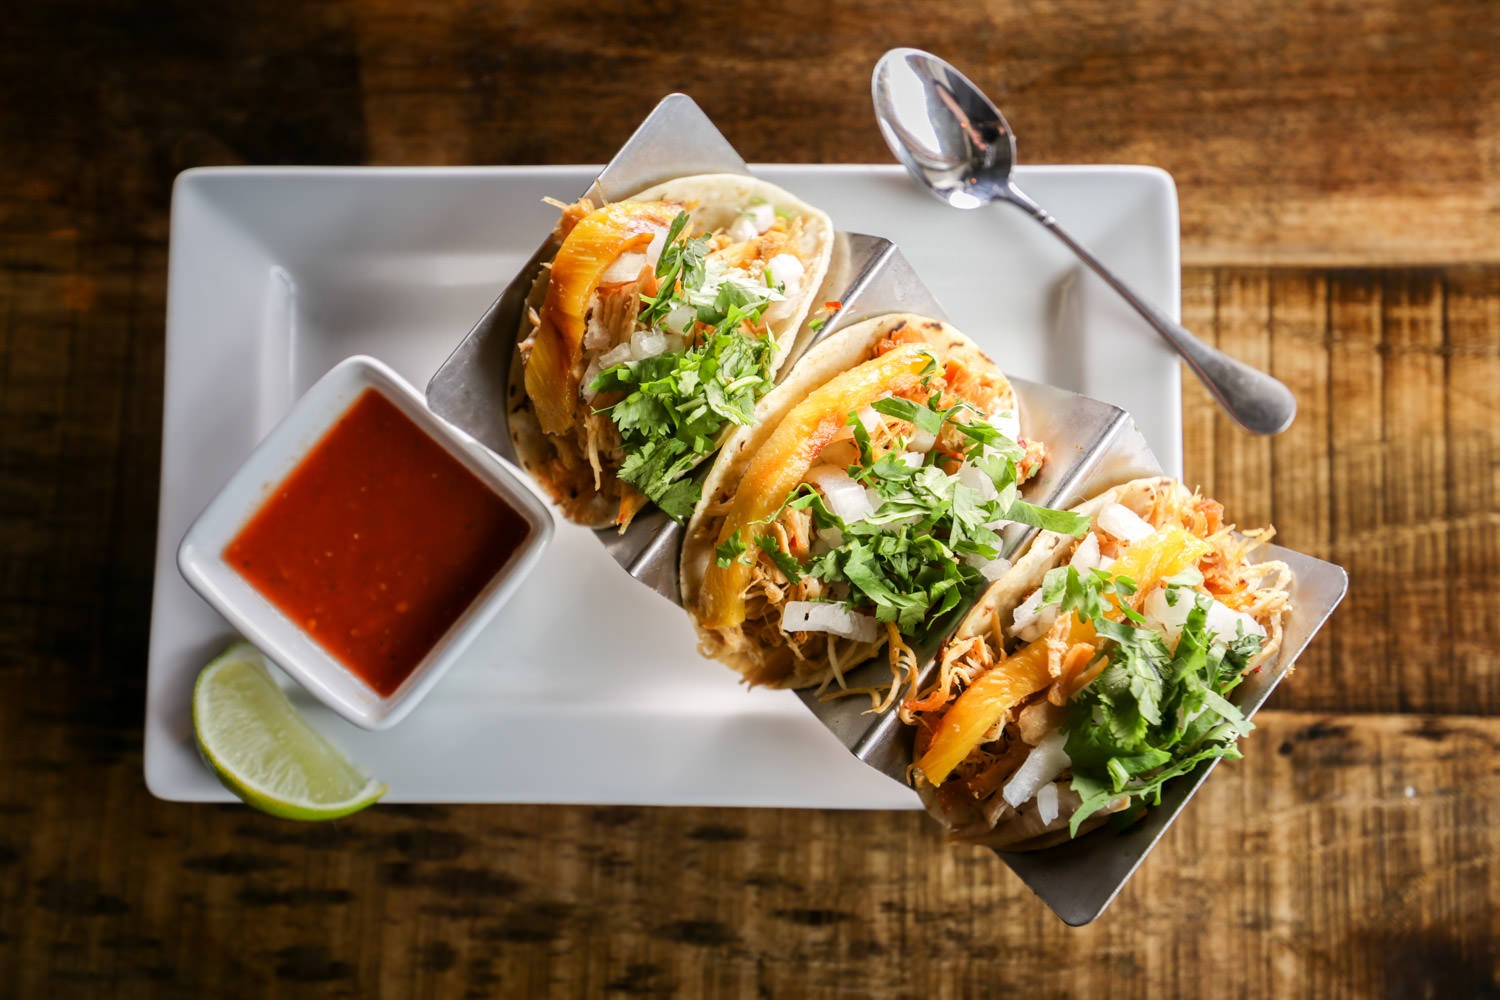 Plate of tacos from Tequila 61